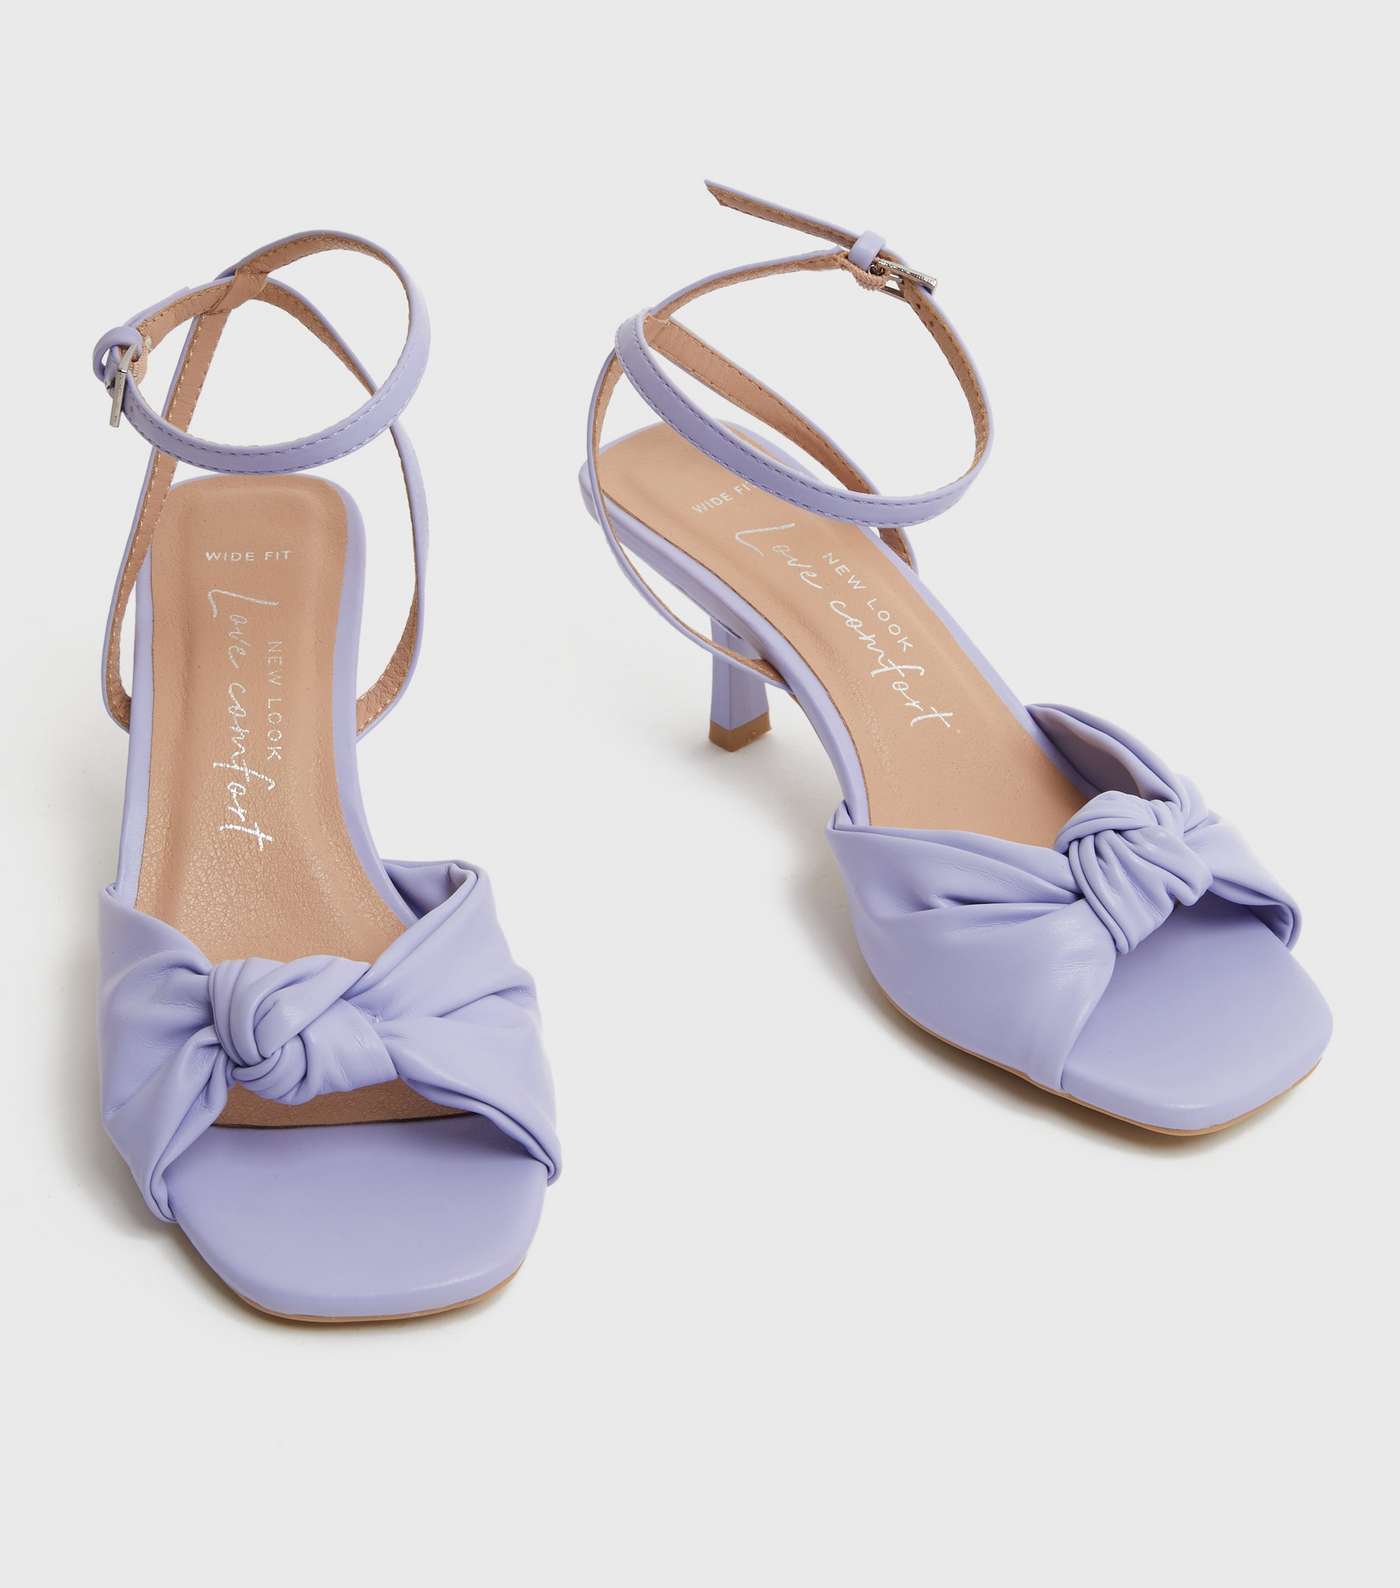 Wide Fit Lilac 2 Part Knot Square Toe Stiletto Heel Sandals Image 3